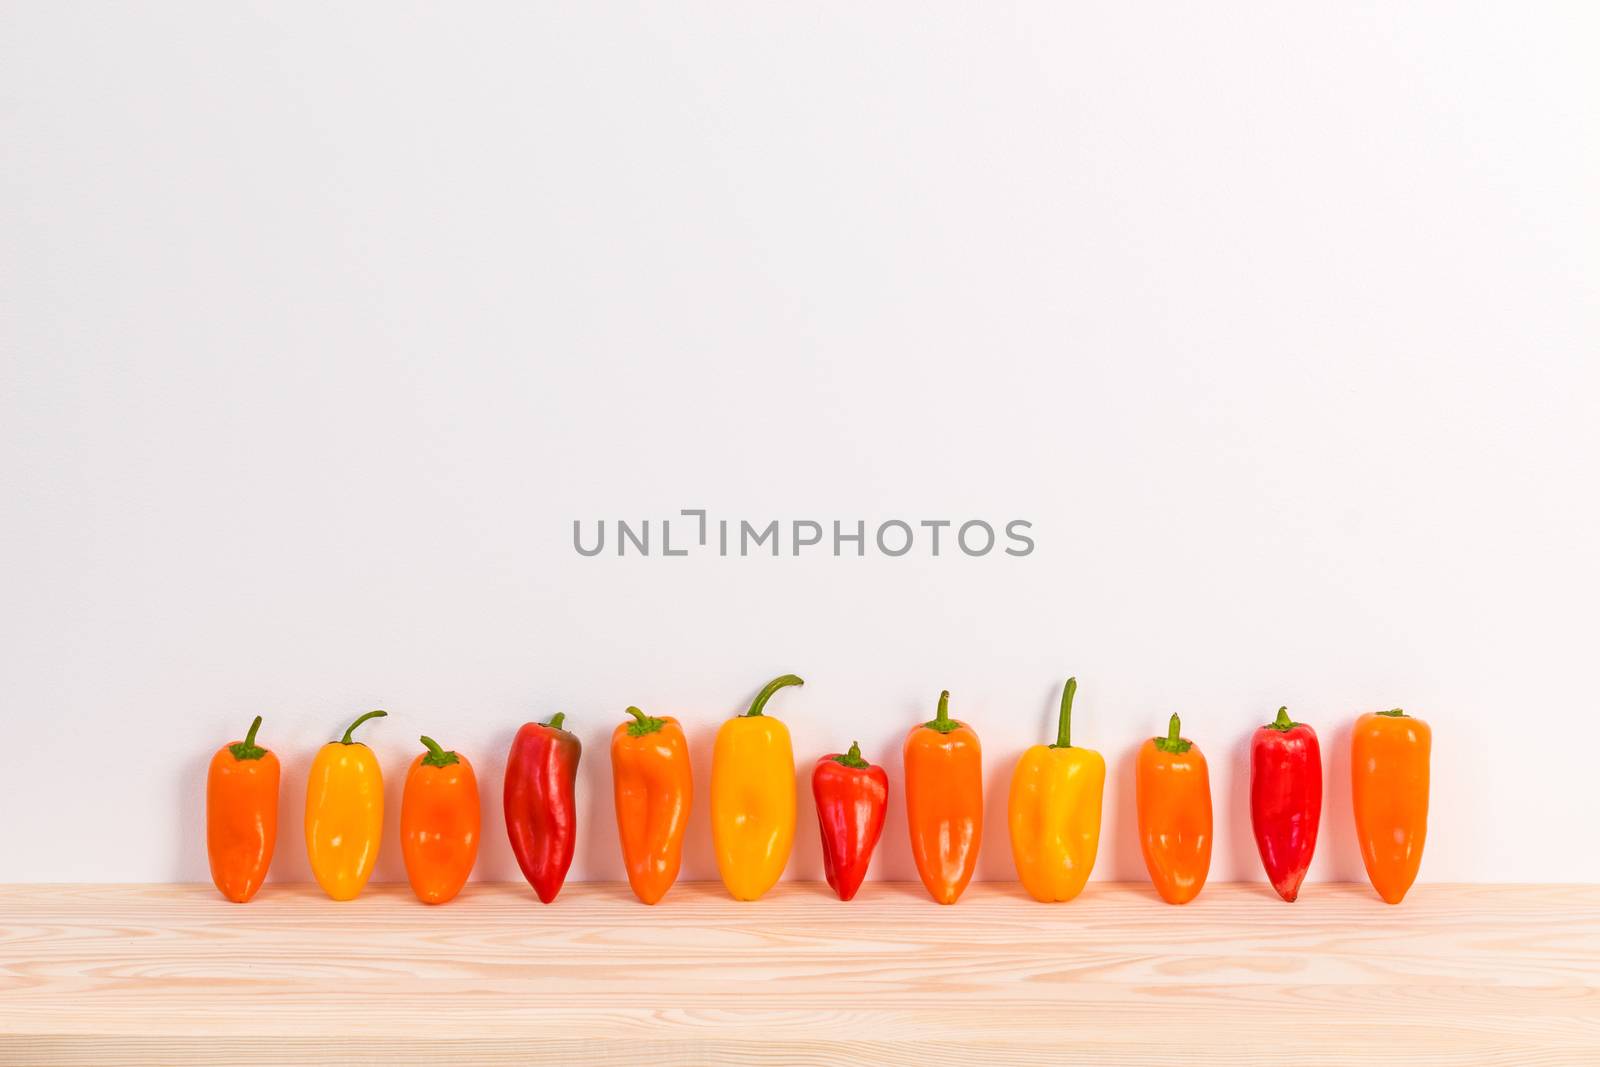 Colorful sweet peppers on wooden surface by anikasalsera